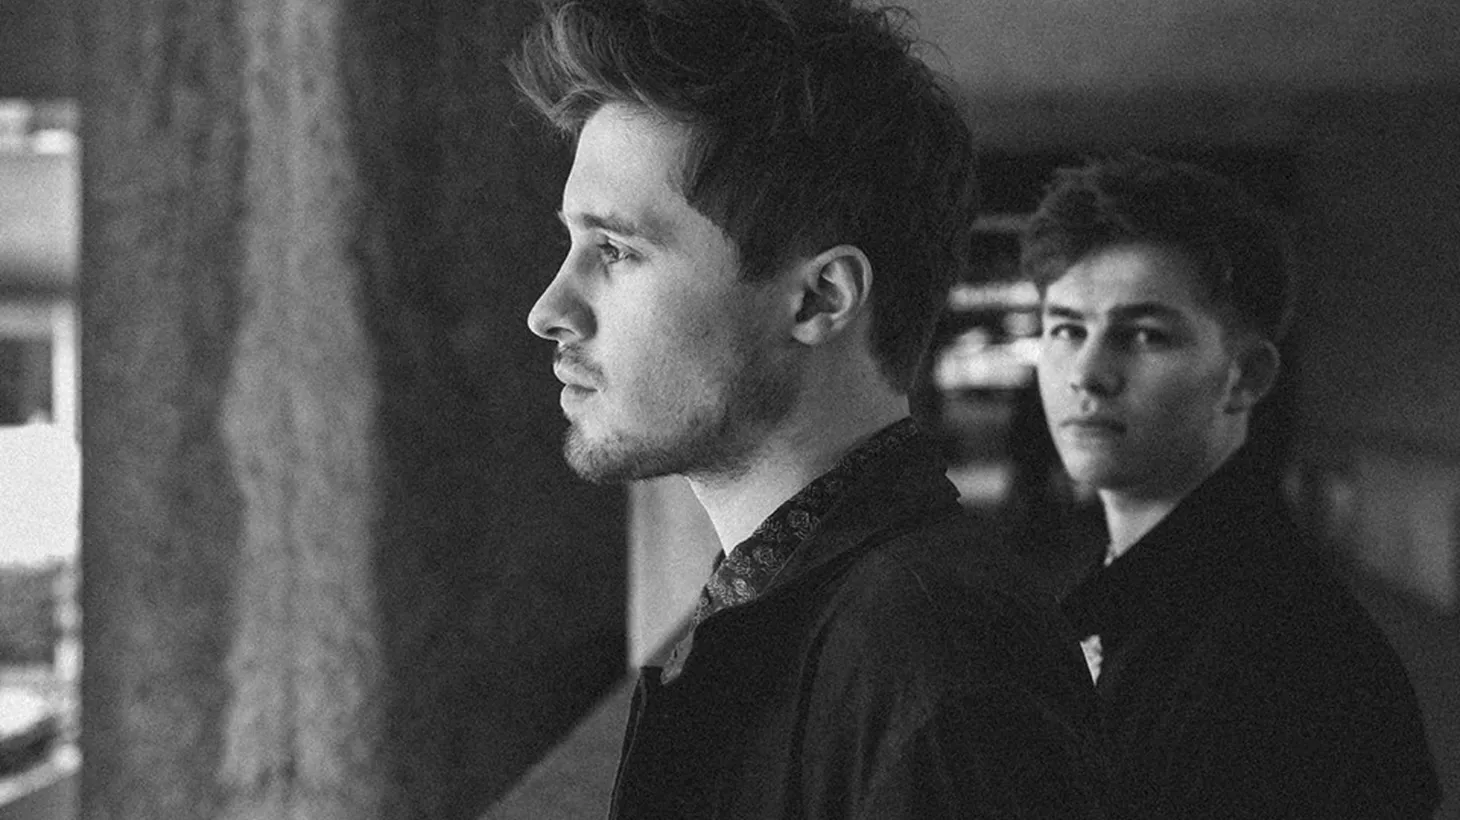 Hailing from the mountainous Lake District of England, dreamy electronic duo Aquilo have been on our radar as a band to watch for the last couple years.